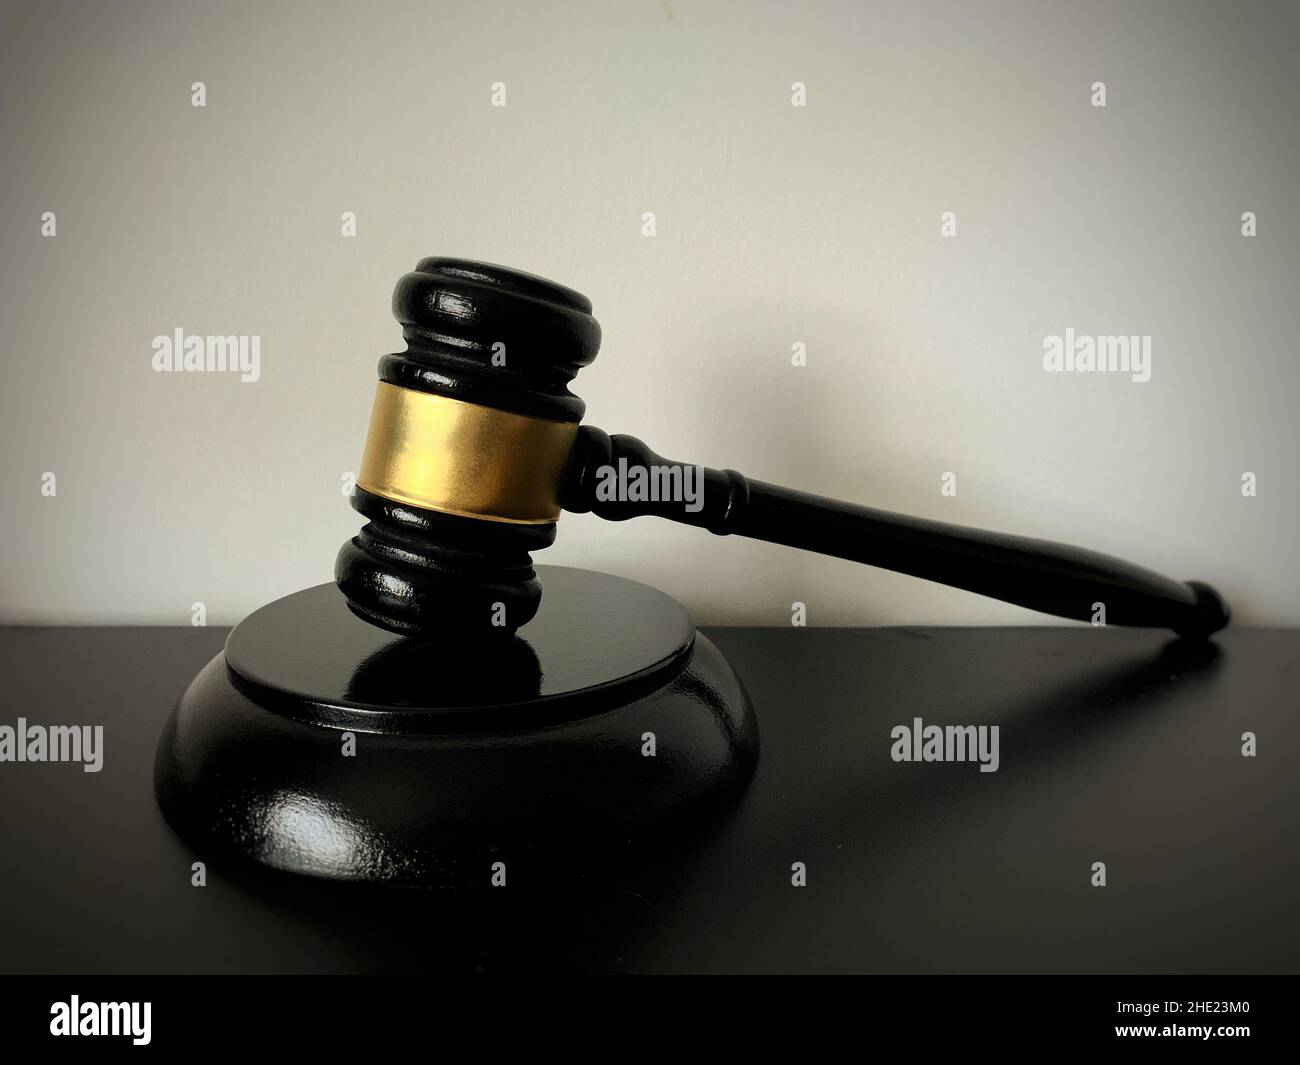 Close up of judge gavel on black table background. Law concept. Stock Photo